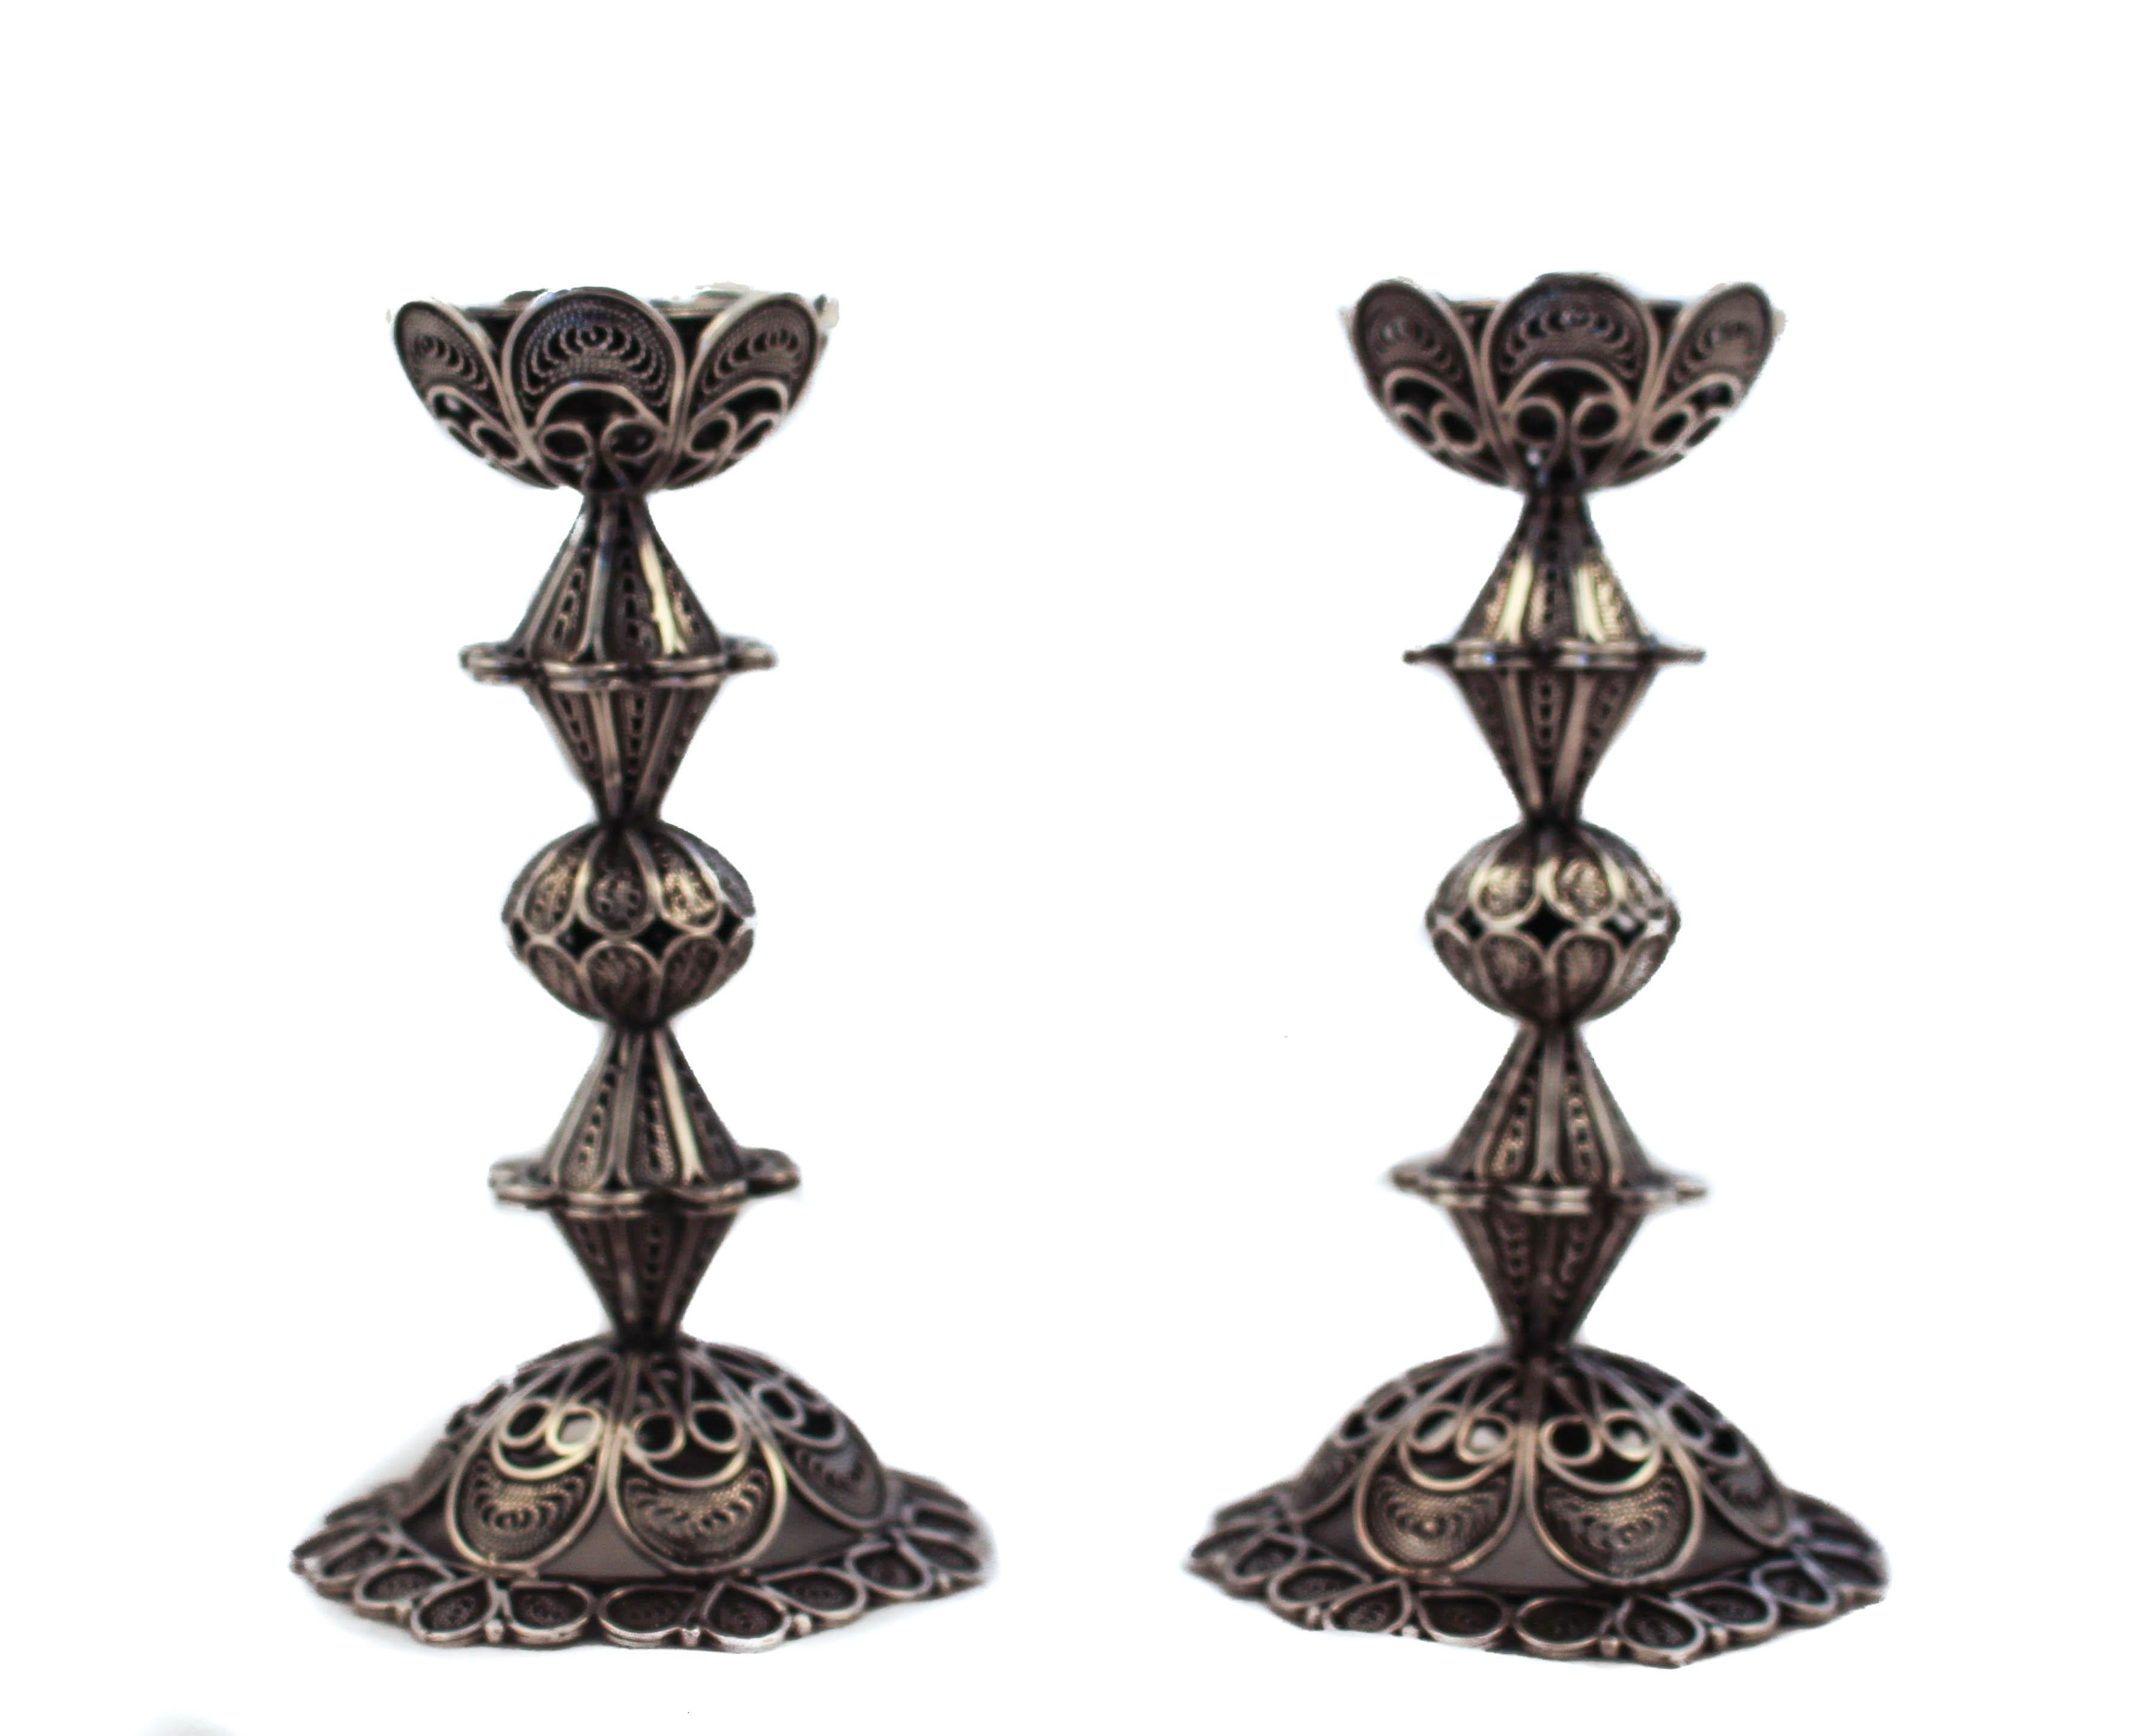 Being offered is a pair of sterling silver candlesticks and a matching charity (Tzedakah) box. Handmade in a filigree design, the invoke the craftsmanship of Israeli artisans and the world renowned Betzalel School of Art in Jerusalem. The